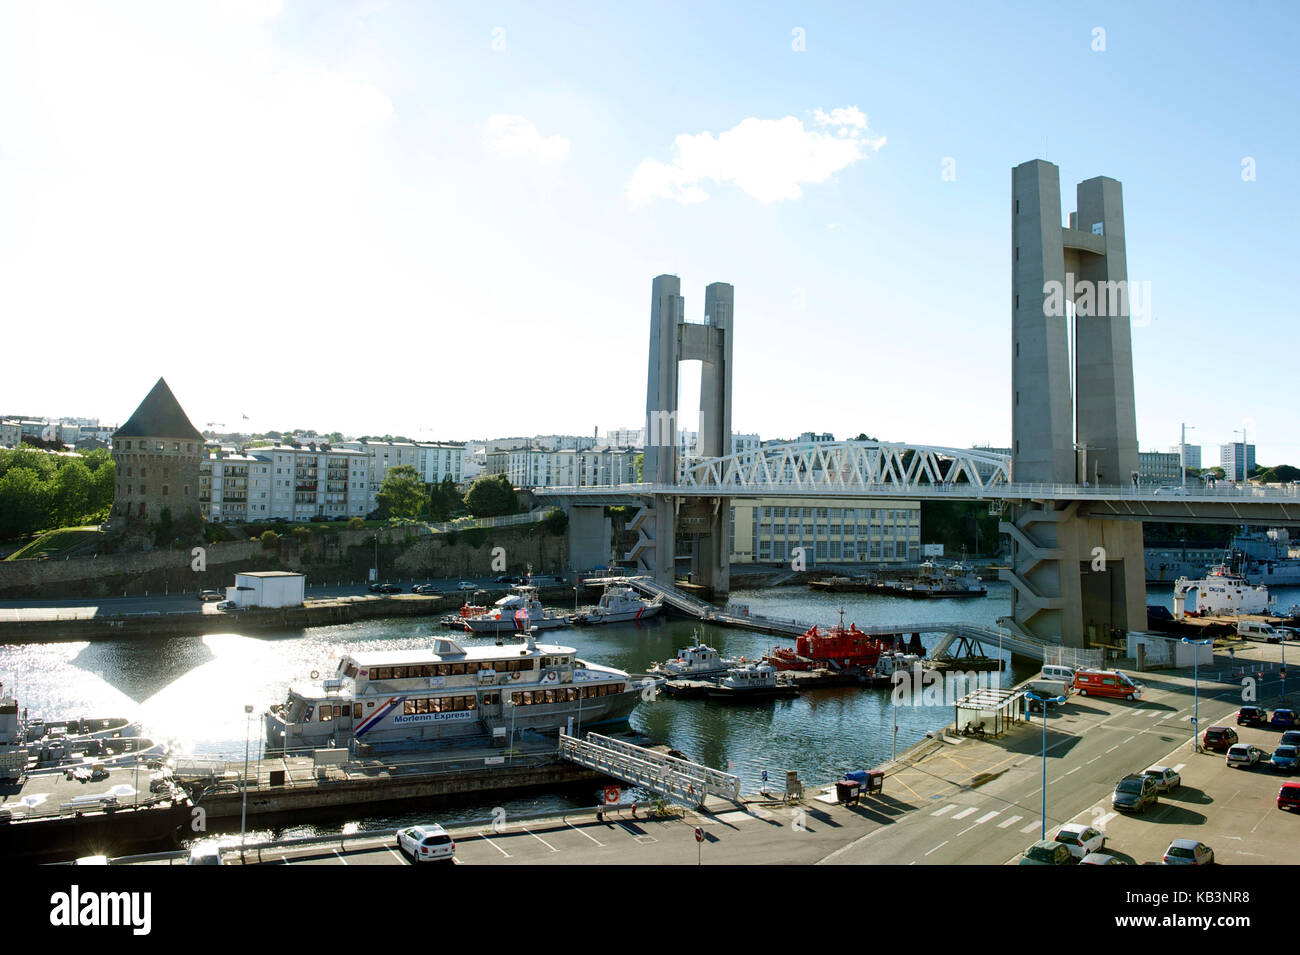 France, Finistere, Brest, Tanguy tower and the Recouvrance Bridge dominates the Penfeld and warships in the Arsenal Stock Photo